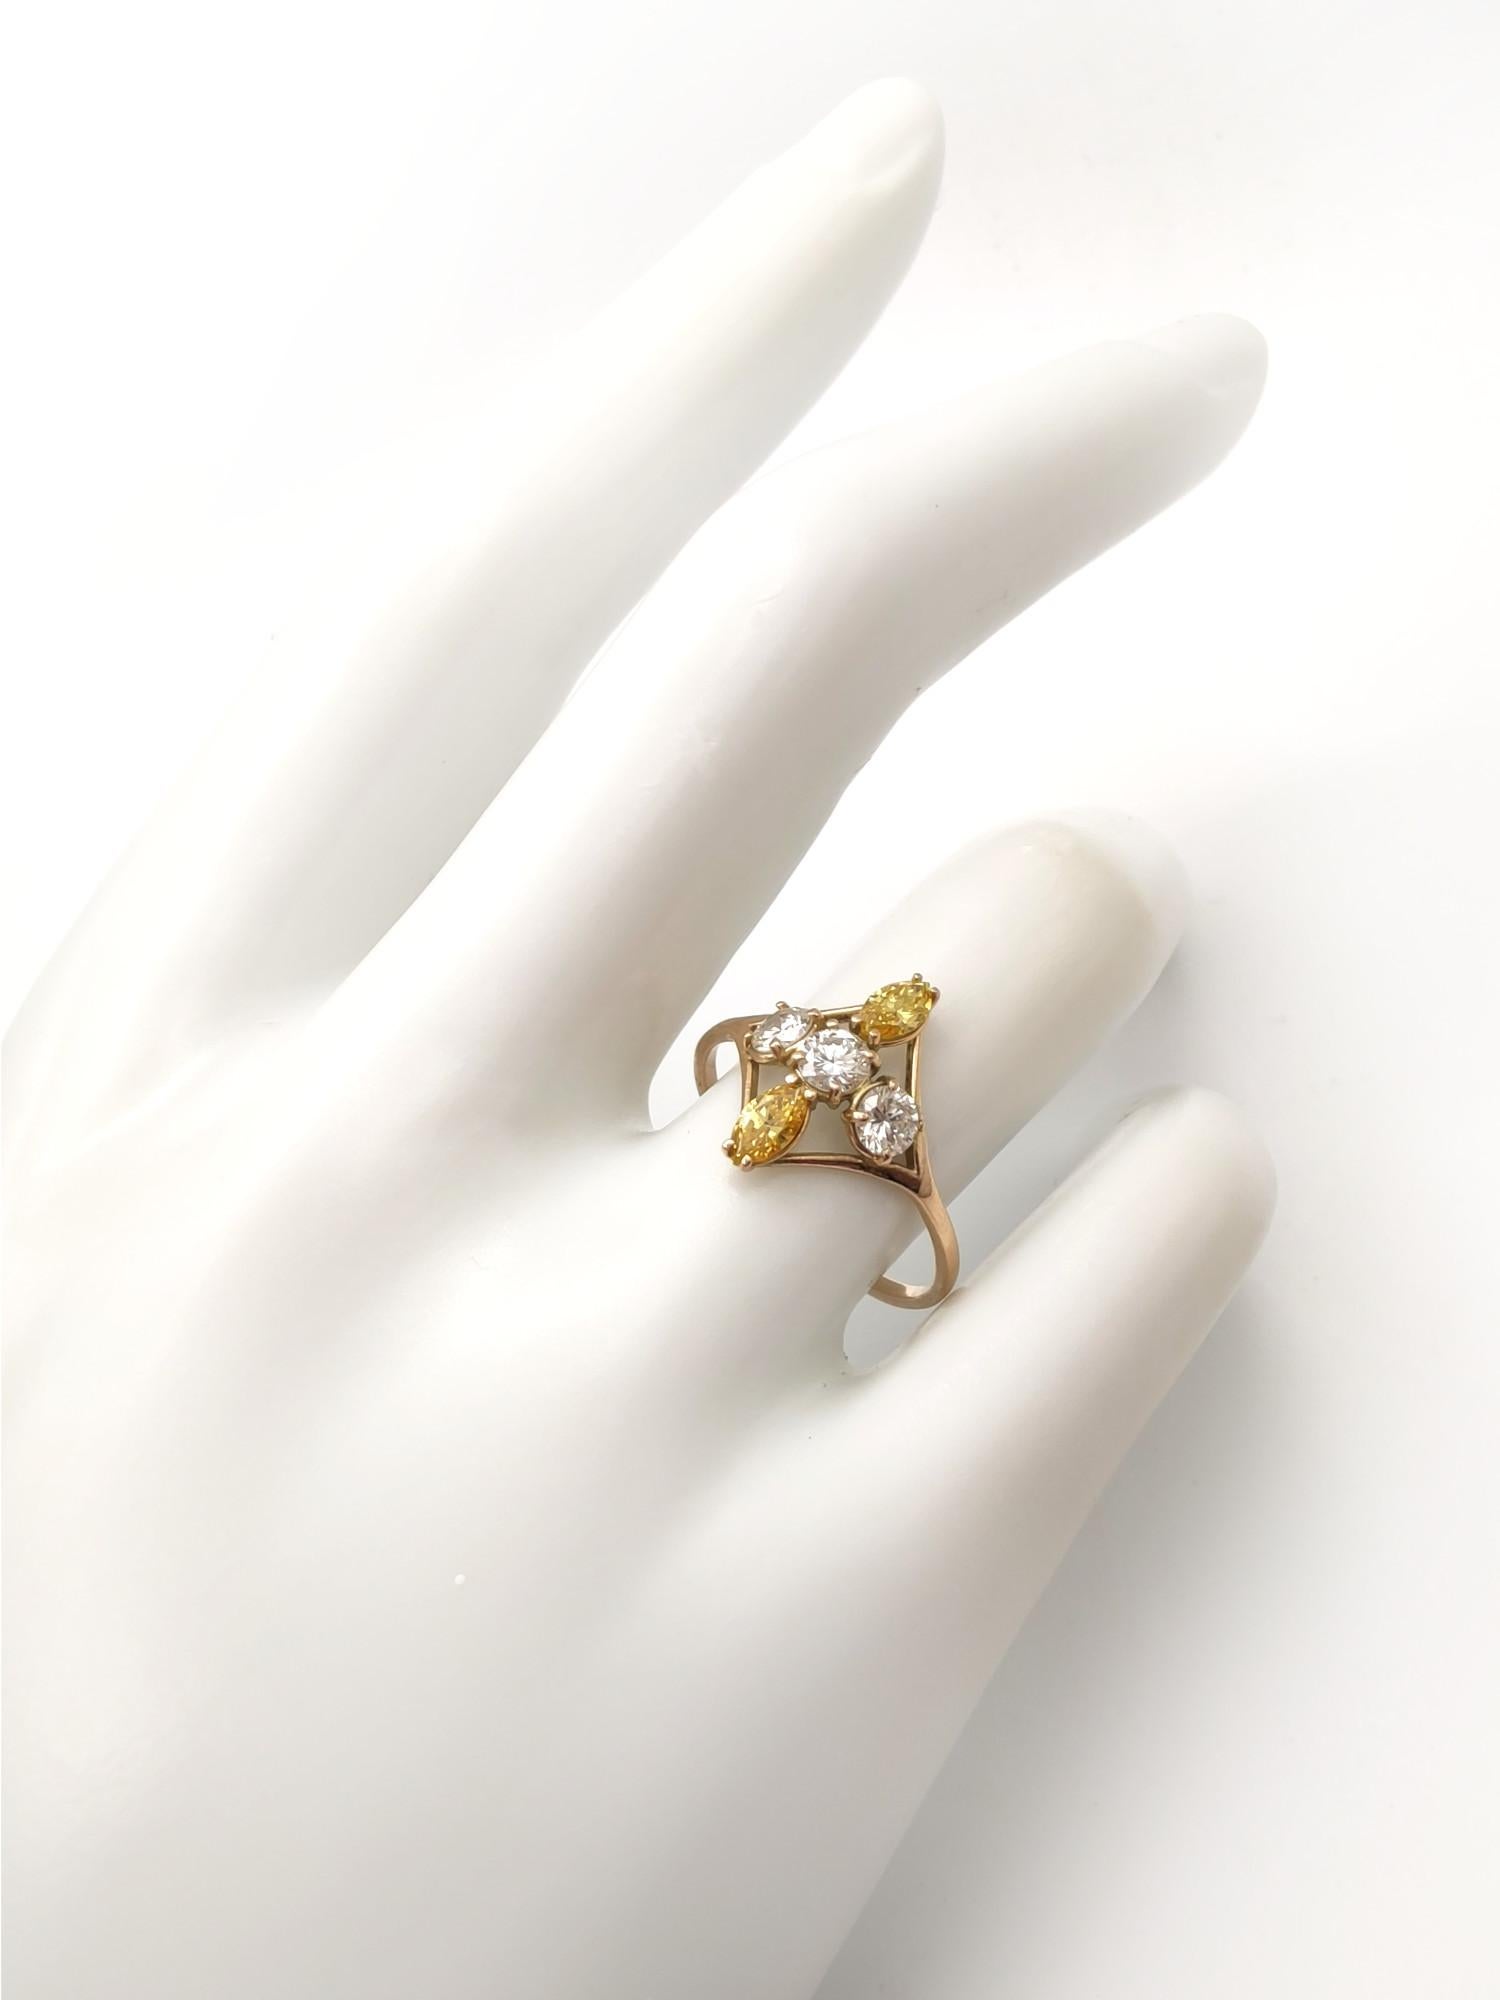 
Explore this exquisite, handcrafted 14K gold ring with a unique fancy color diamond. Ideal for American women, it's a perfect choice for engagement, weddings, or as a stunning cocktail ring. Elevate your style with this one-of-a-kind jewelry